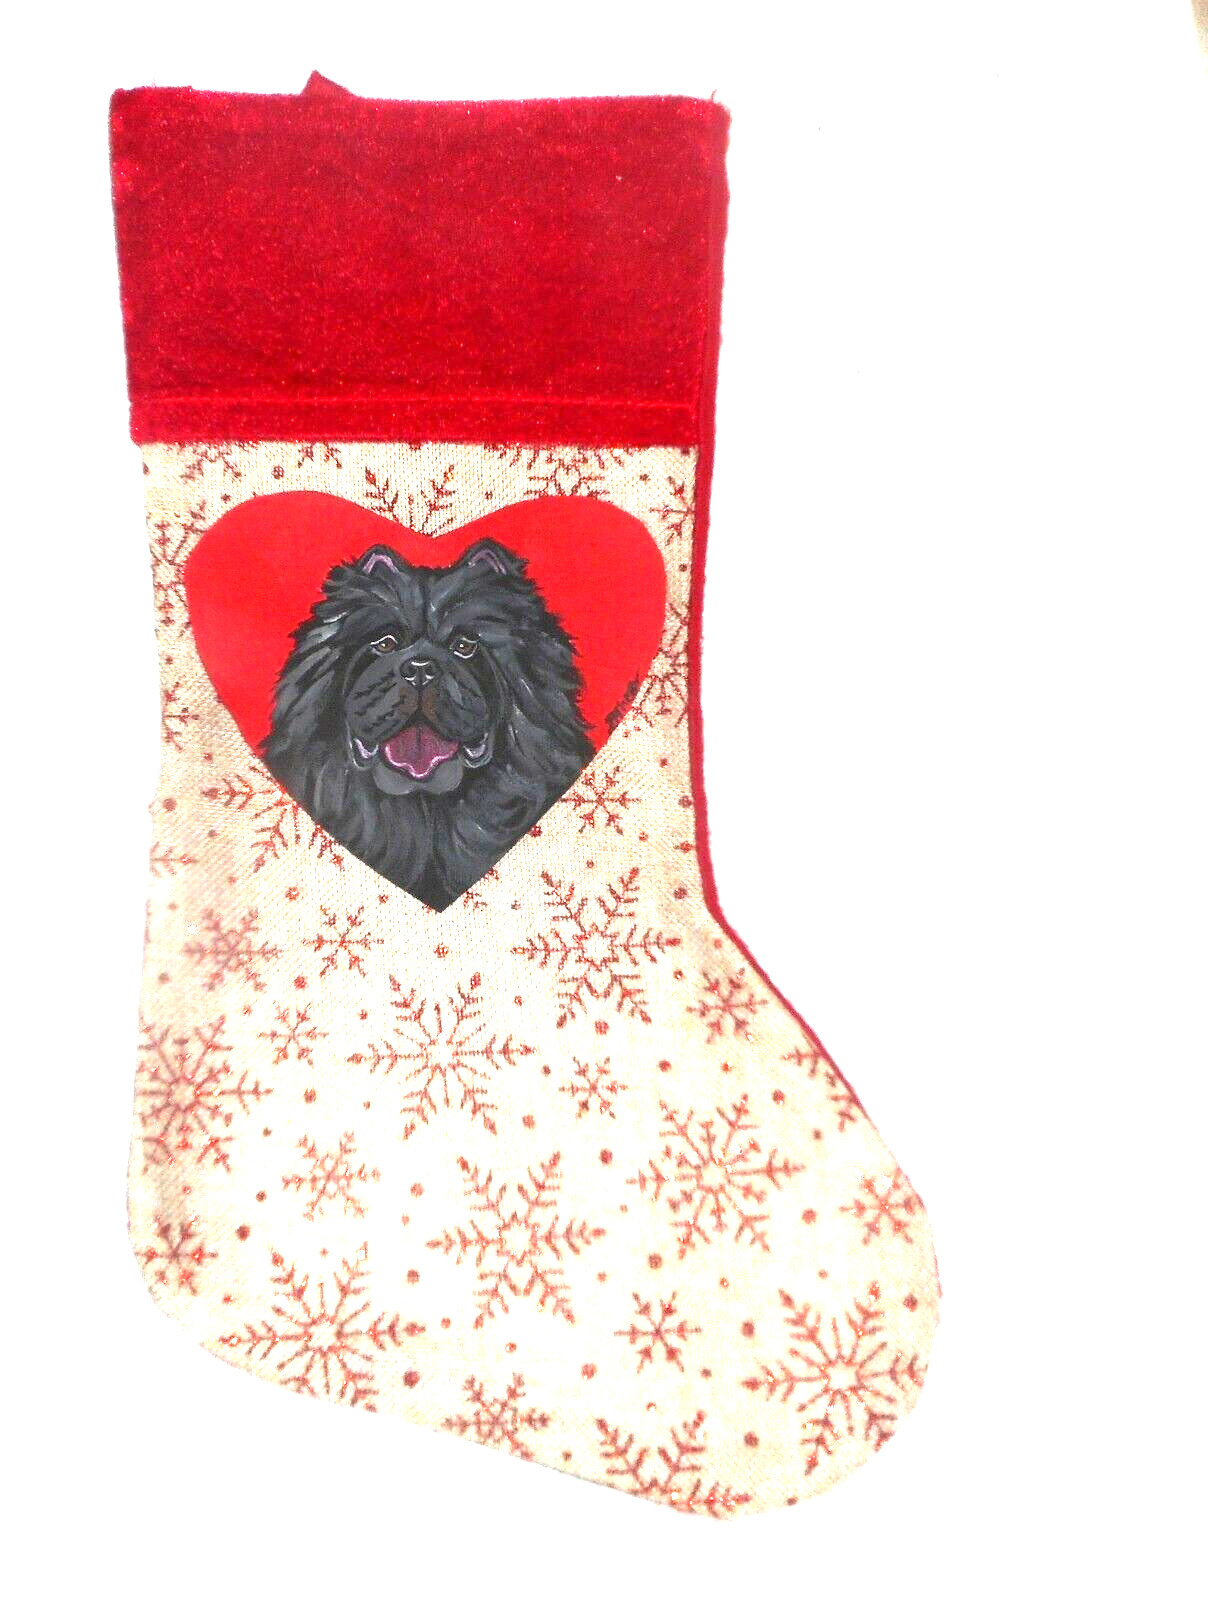 Black Chow Chow Dog Hand Painted Christmas Gift Stocking Holiday Decoration